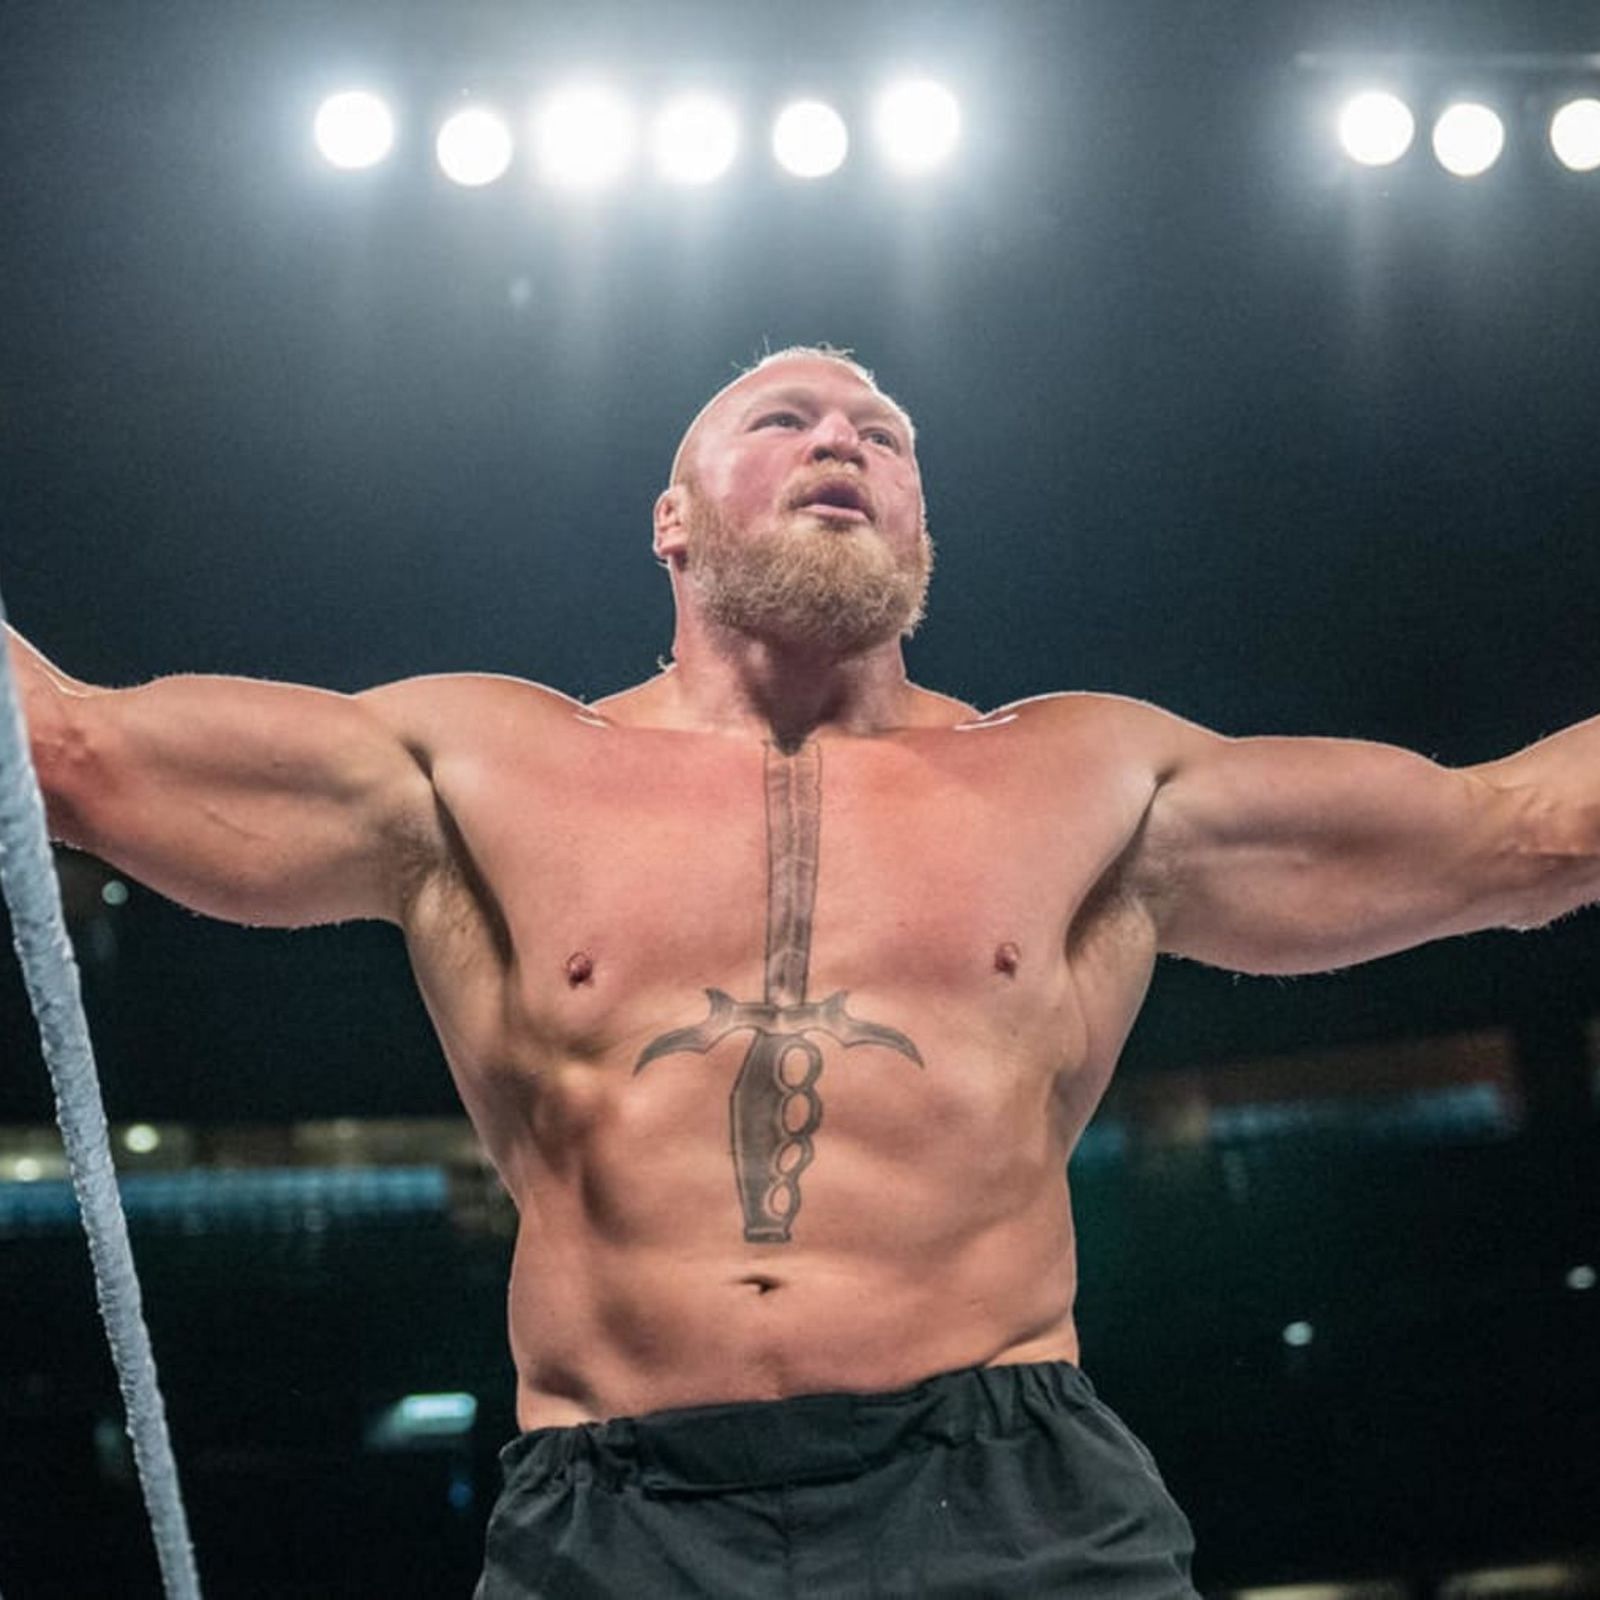 Does Brock Lesnar have another title run in his WWE future?